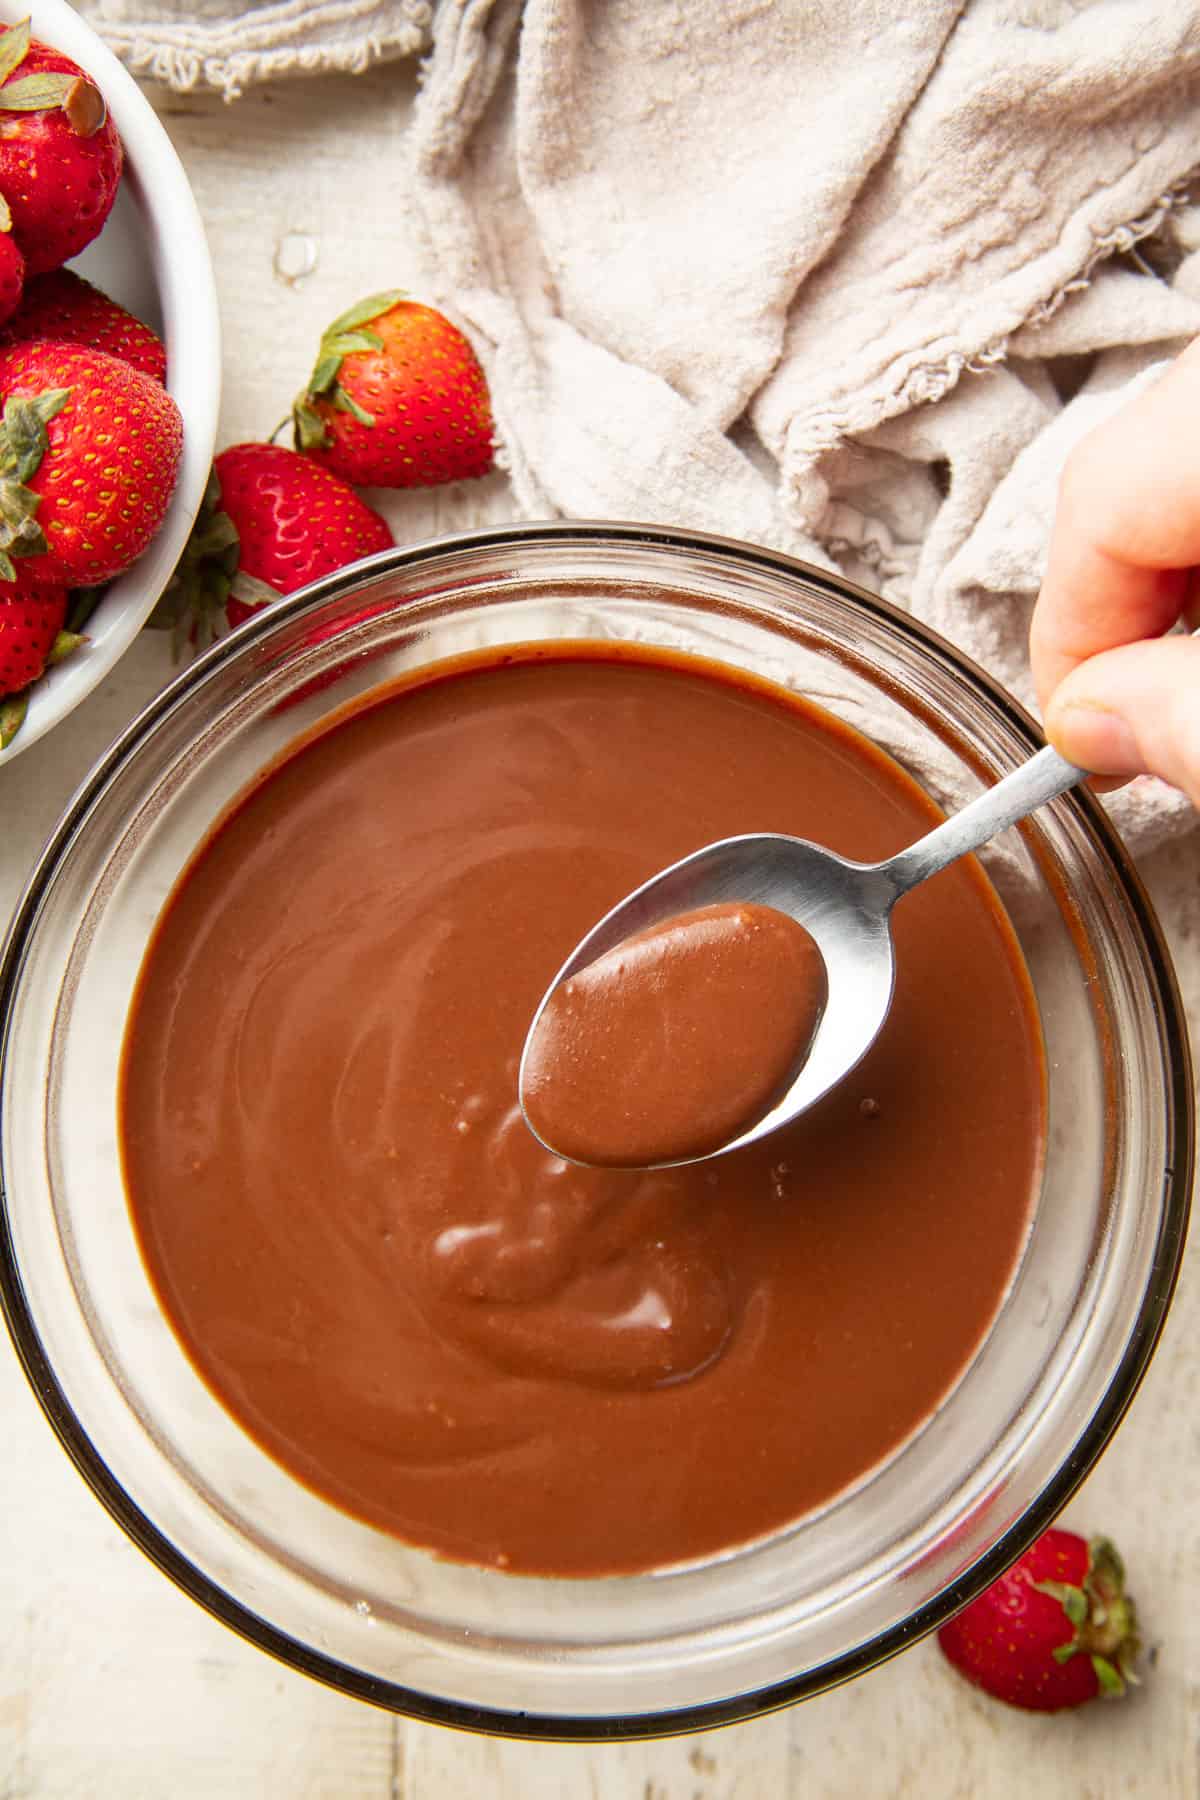 Spoon held over a bowl of Vegan Ganache on a table with fresh strawberries.